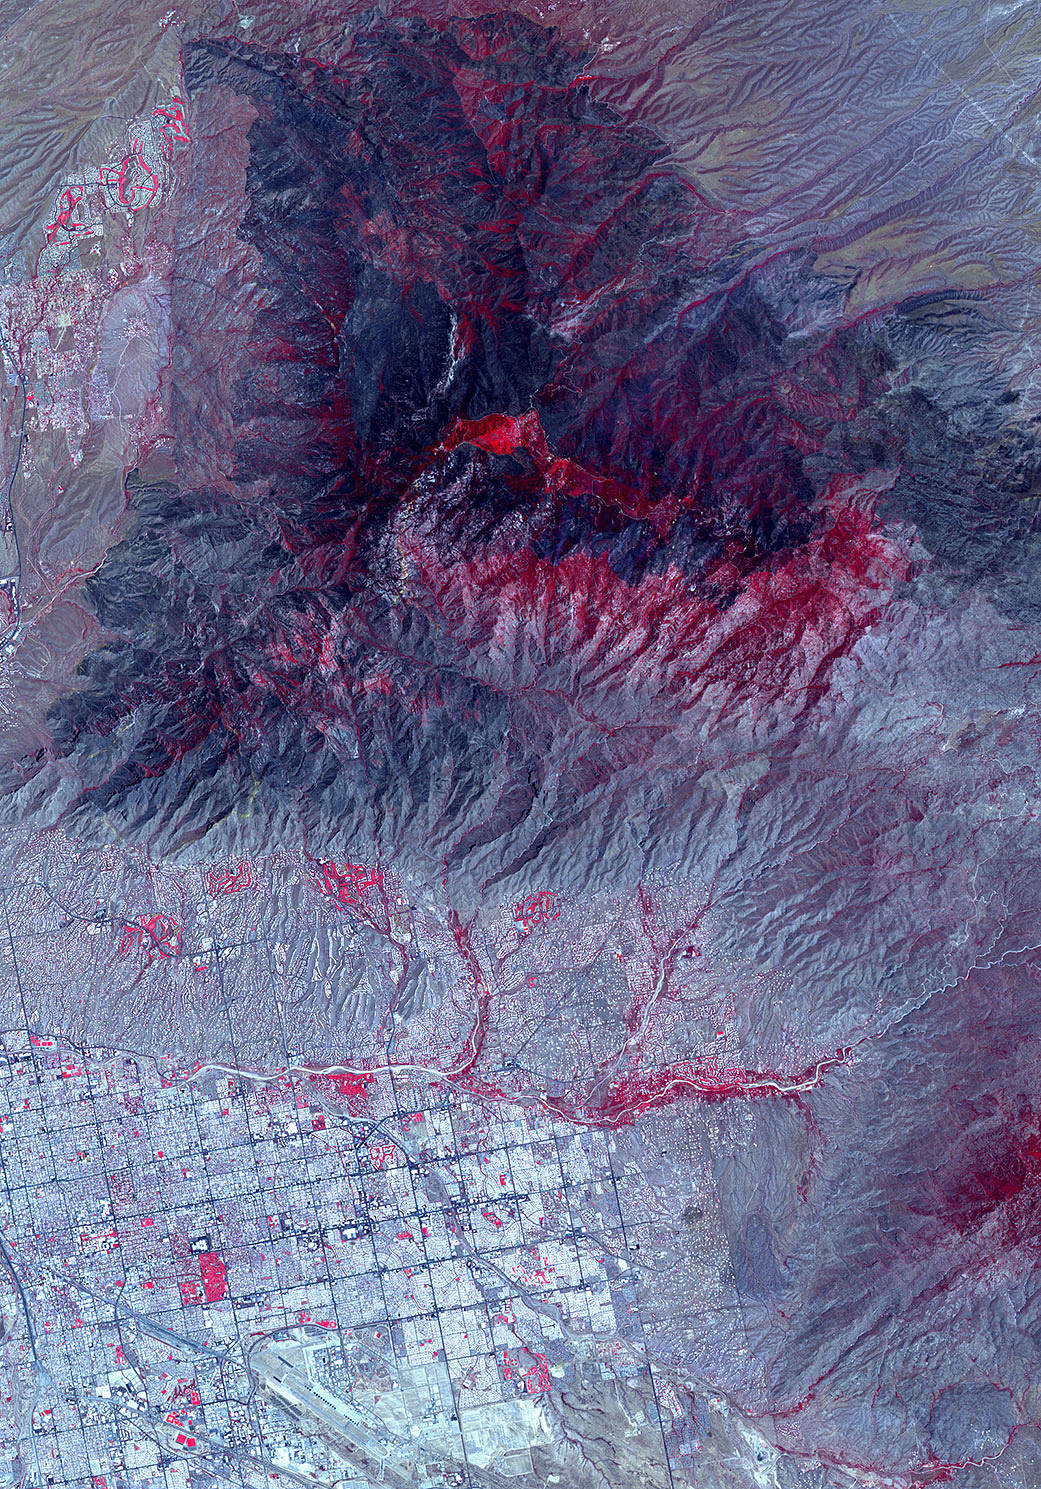 NASA's Advanced Spaceborne Thermal Emission and Reflection Radiometer (ASTER) instrument imaged areas burned by the Bighorn Fire